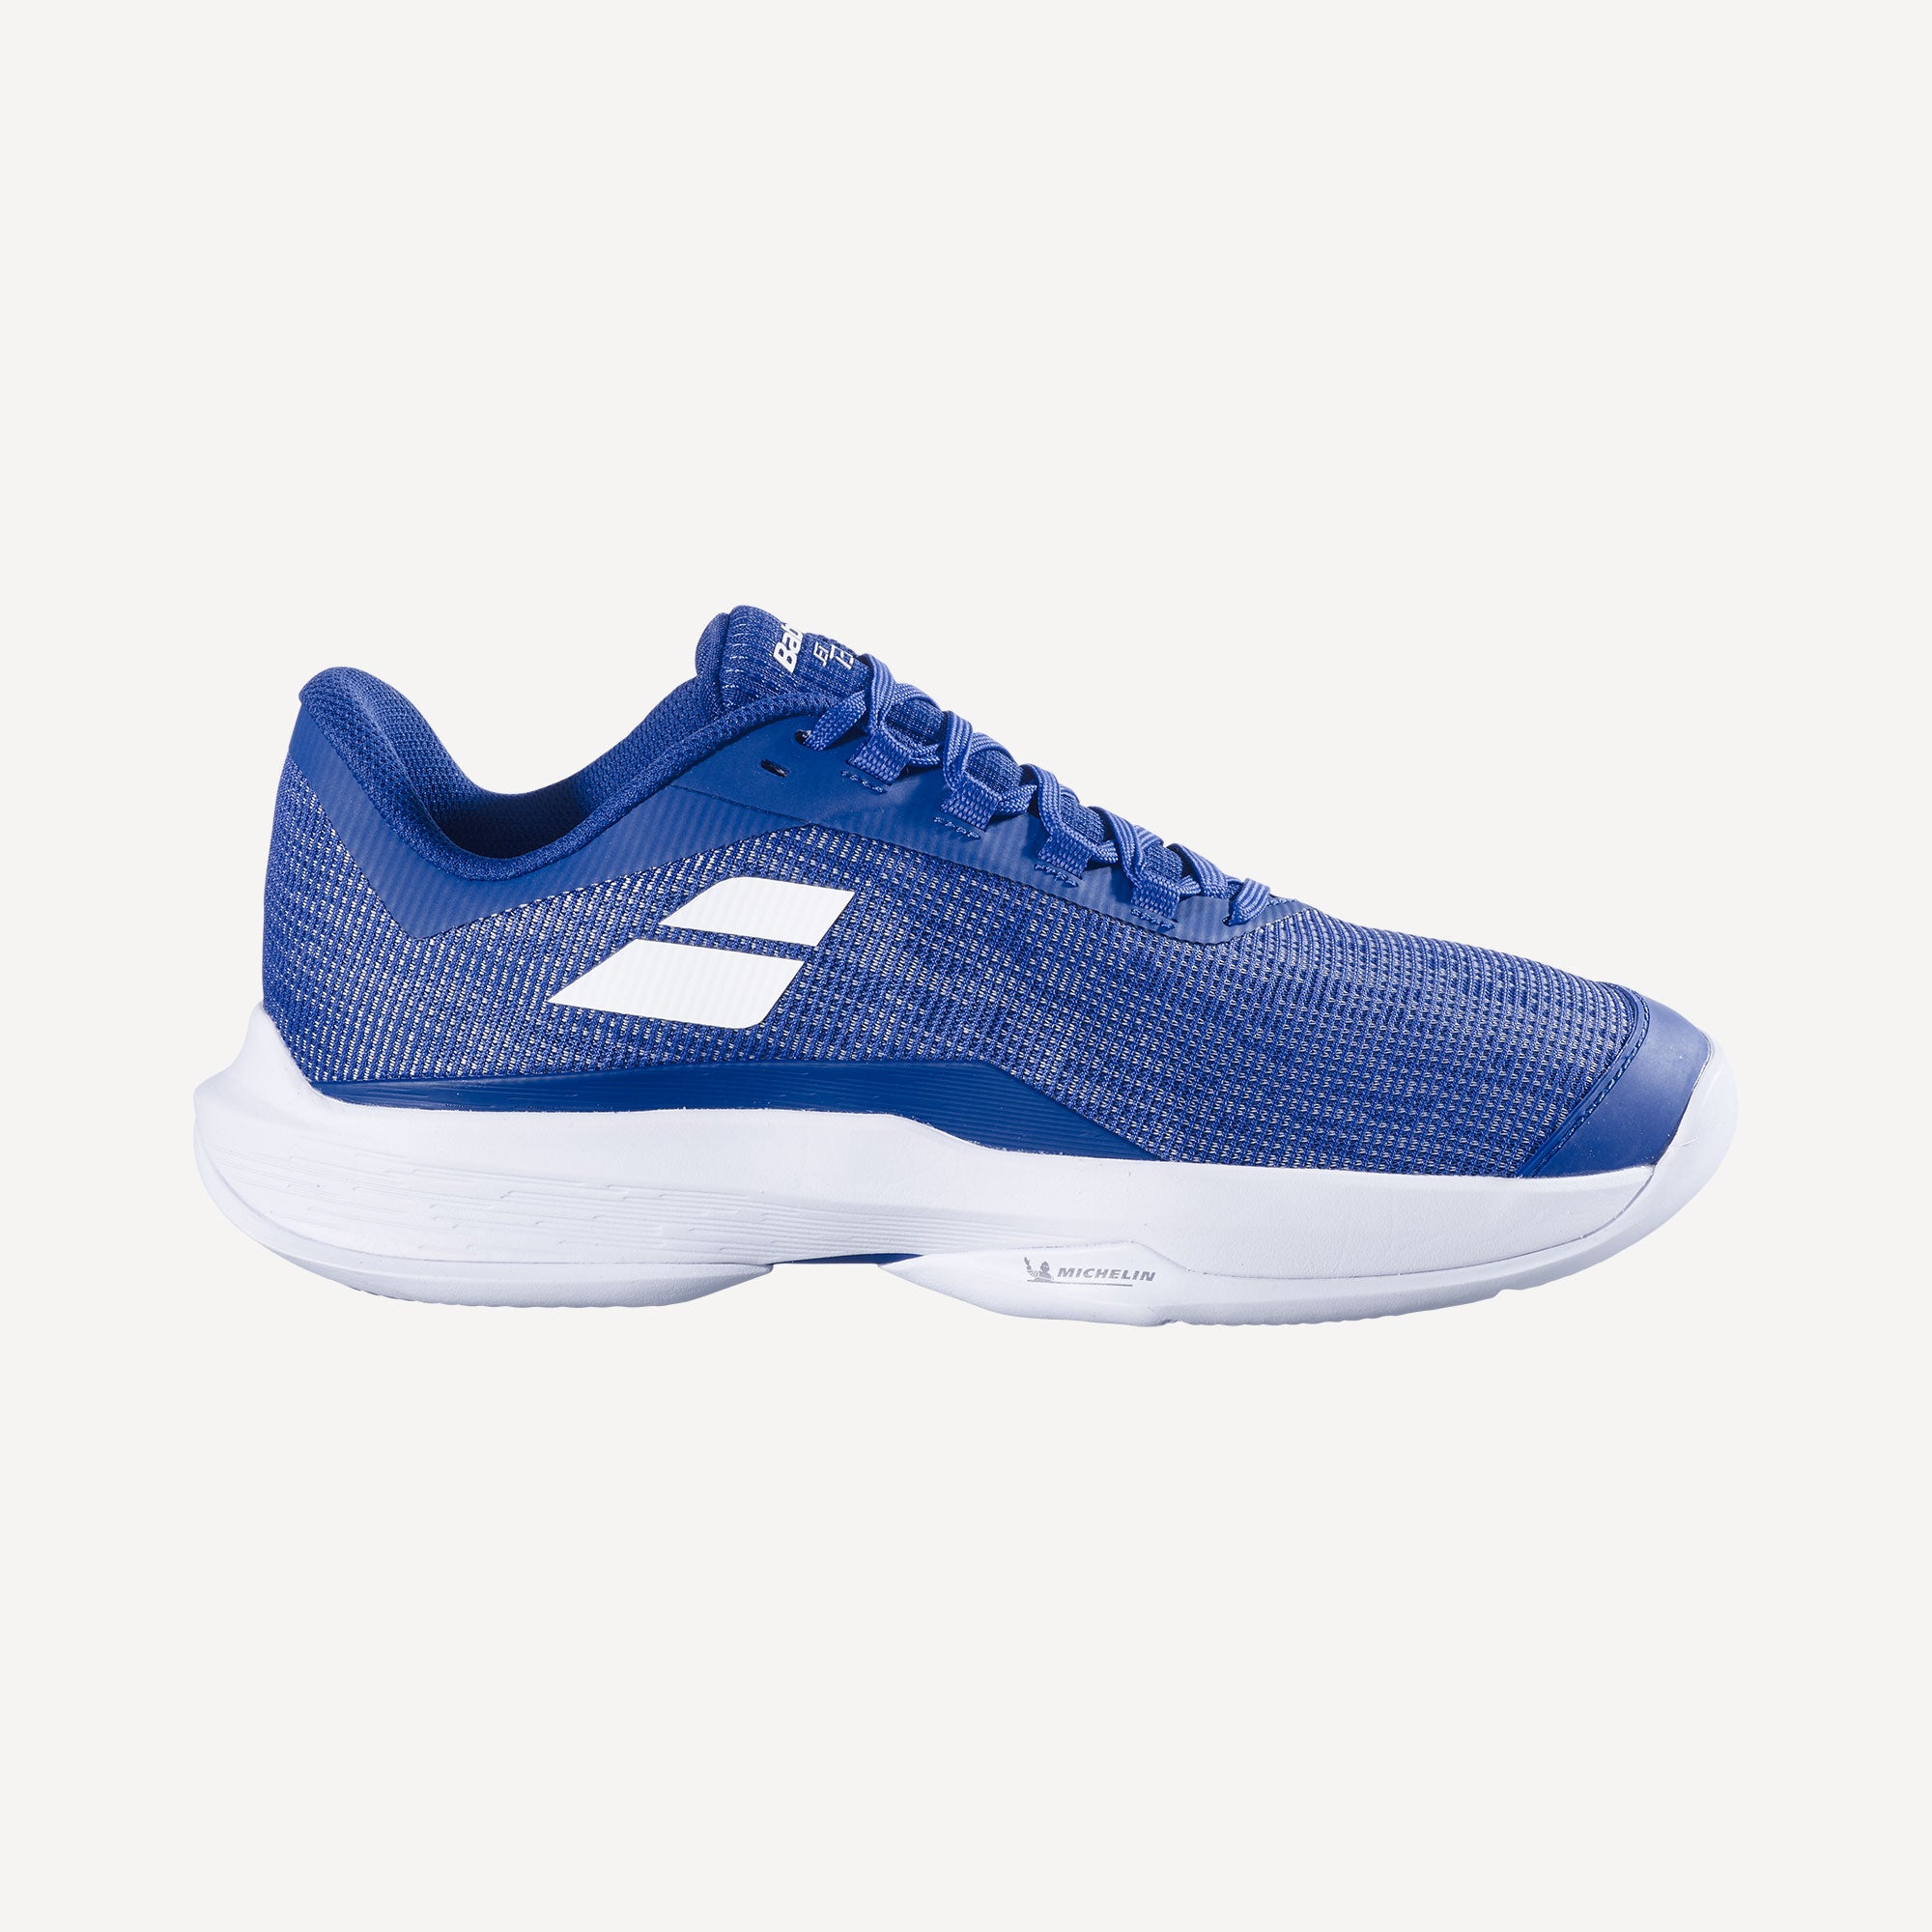 Shoes All Men's Tennis - Shoes, Clothing & Accessories